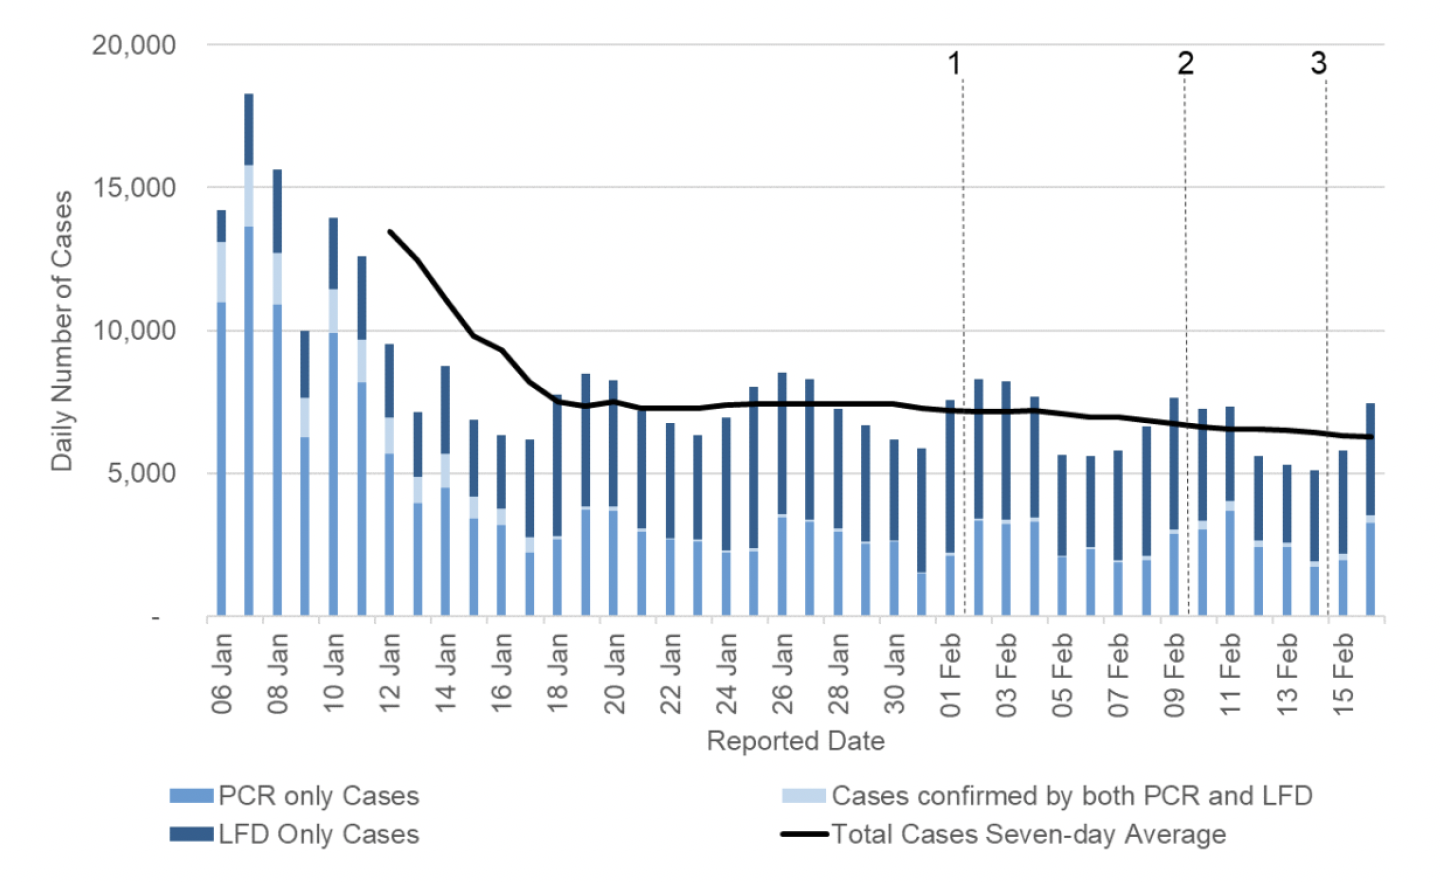 Figure 1. A line chart showing the number of PCR and LFD cases by reporting date, with lines showing the cut-off points for each of the modelling inputs.